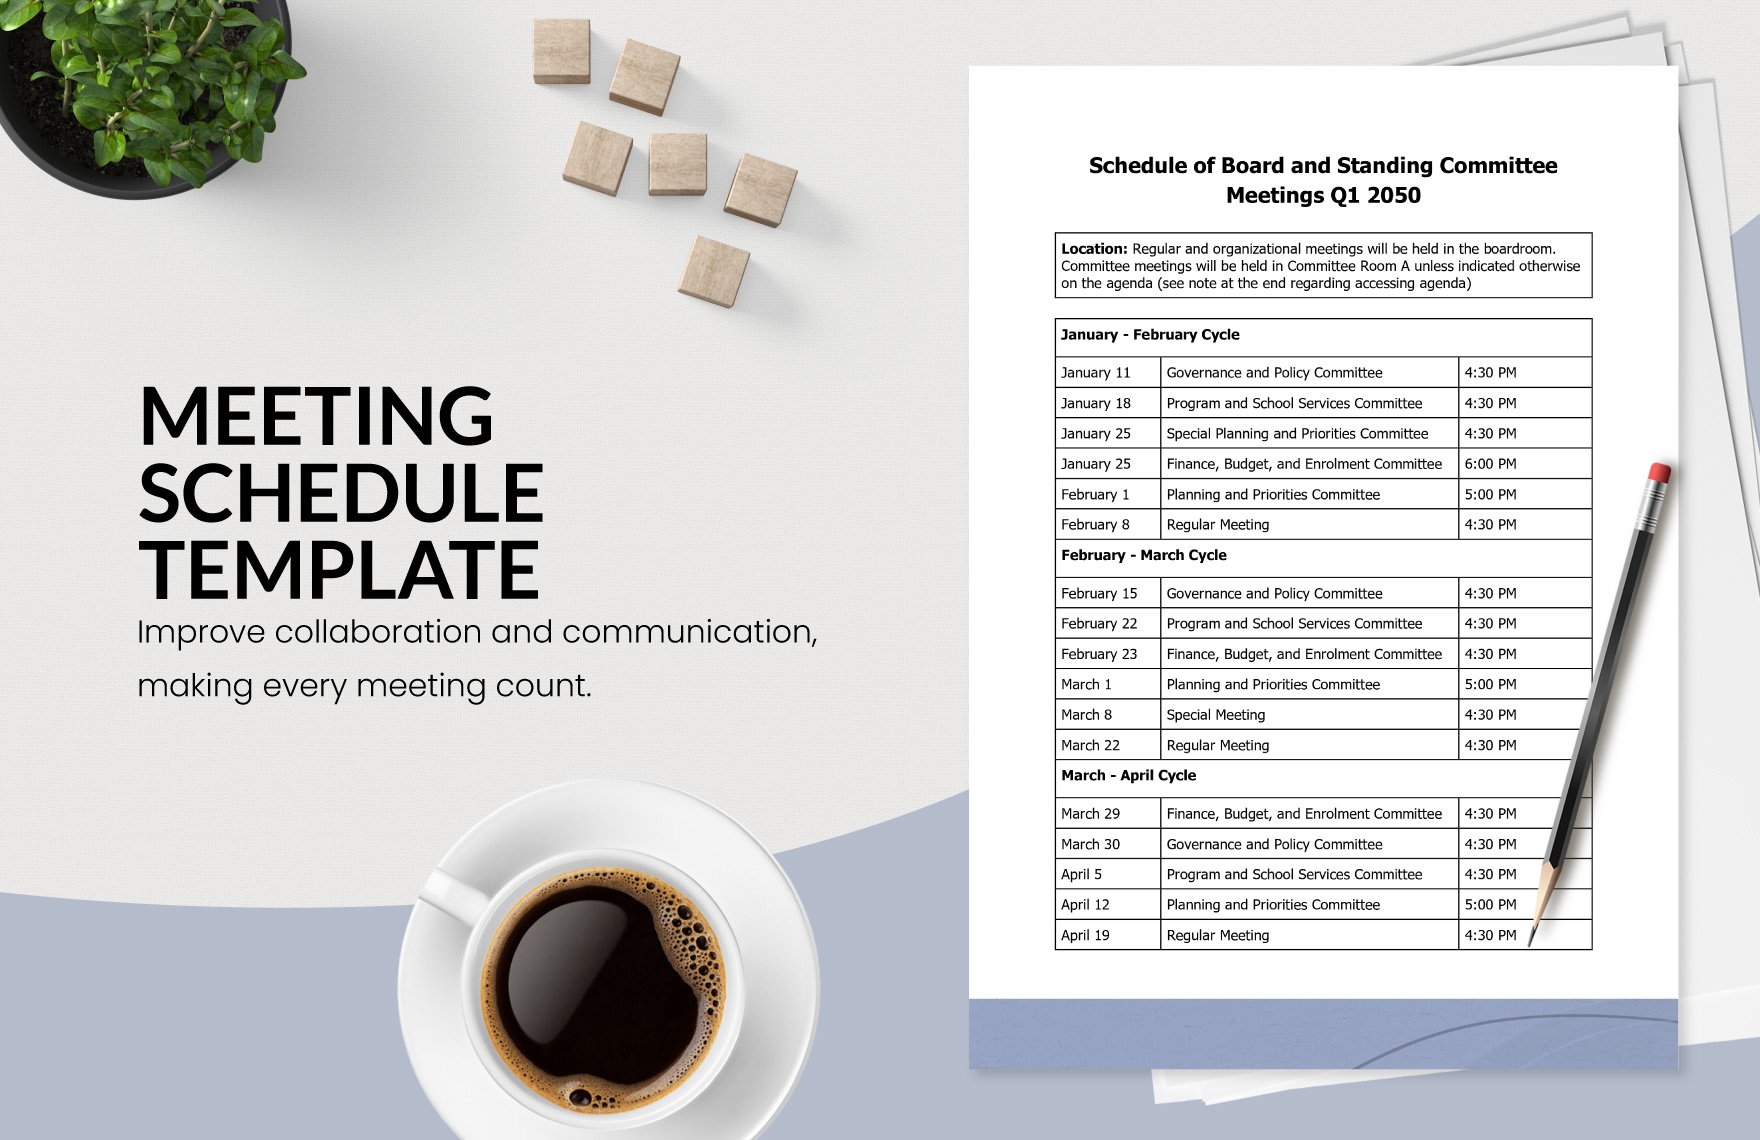 Meeting Schedule Template in Word, Google Docs, Excel, PDF, Google Sheets, Apple Pages, Apple Numbers